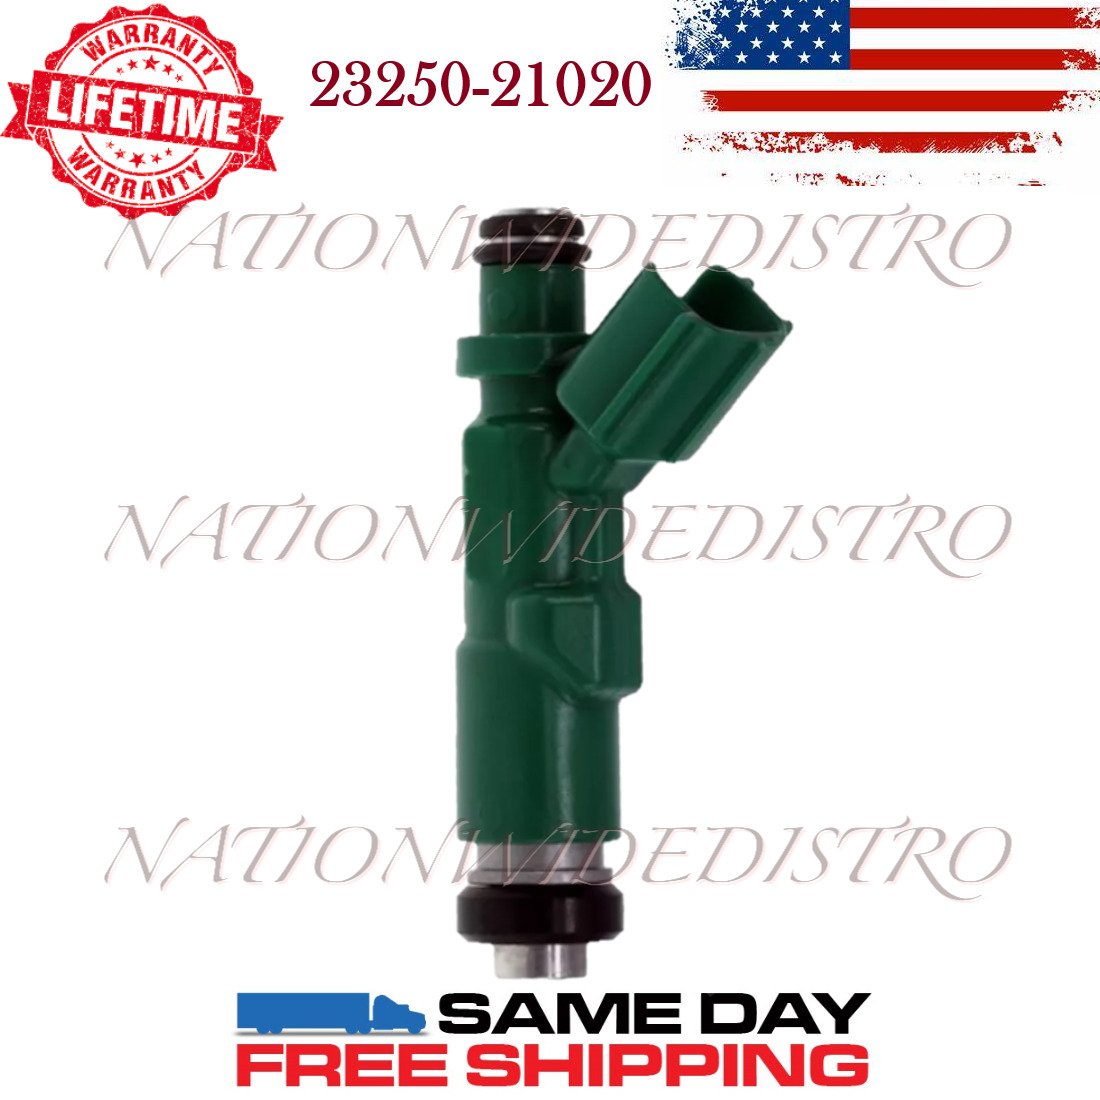 1x OEM DENSO FUEL INJECTOR FOR 2001-2009 Toyota Prius 1.5L L4 23250-21020